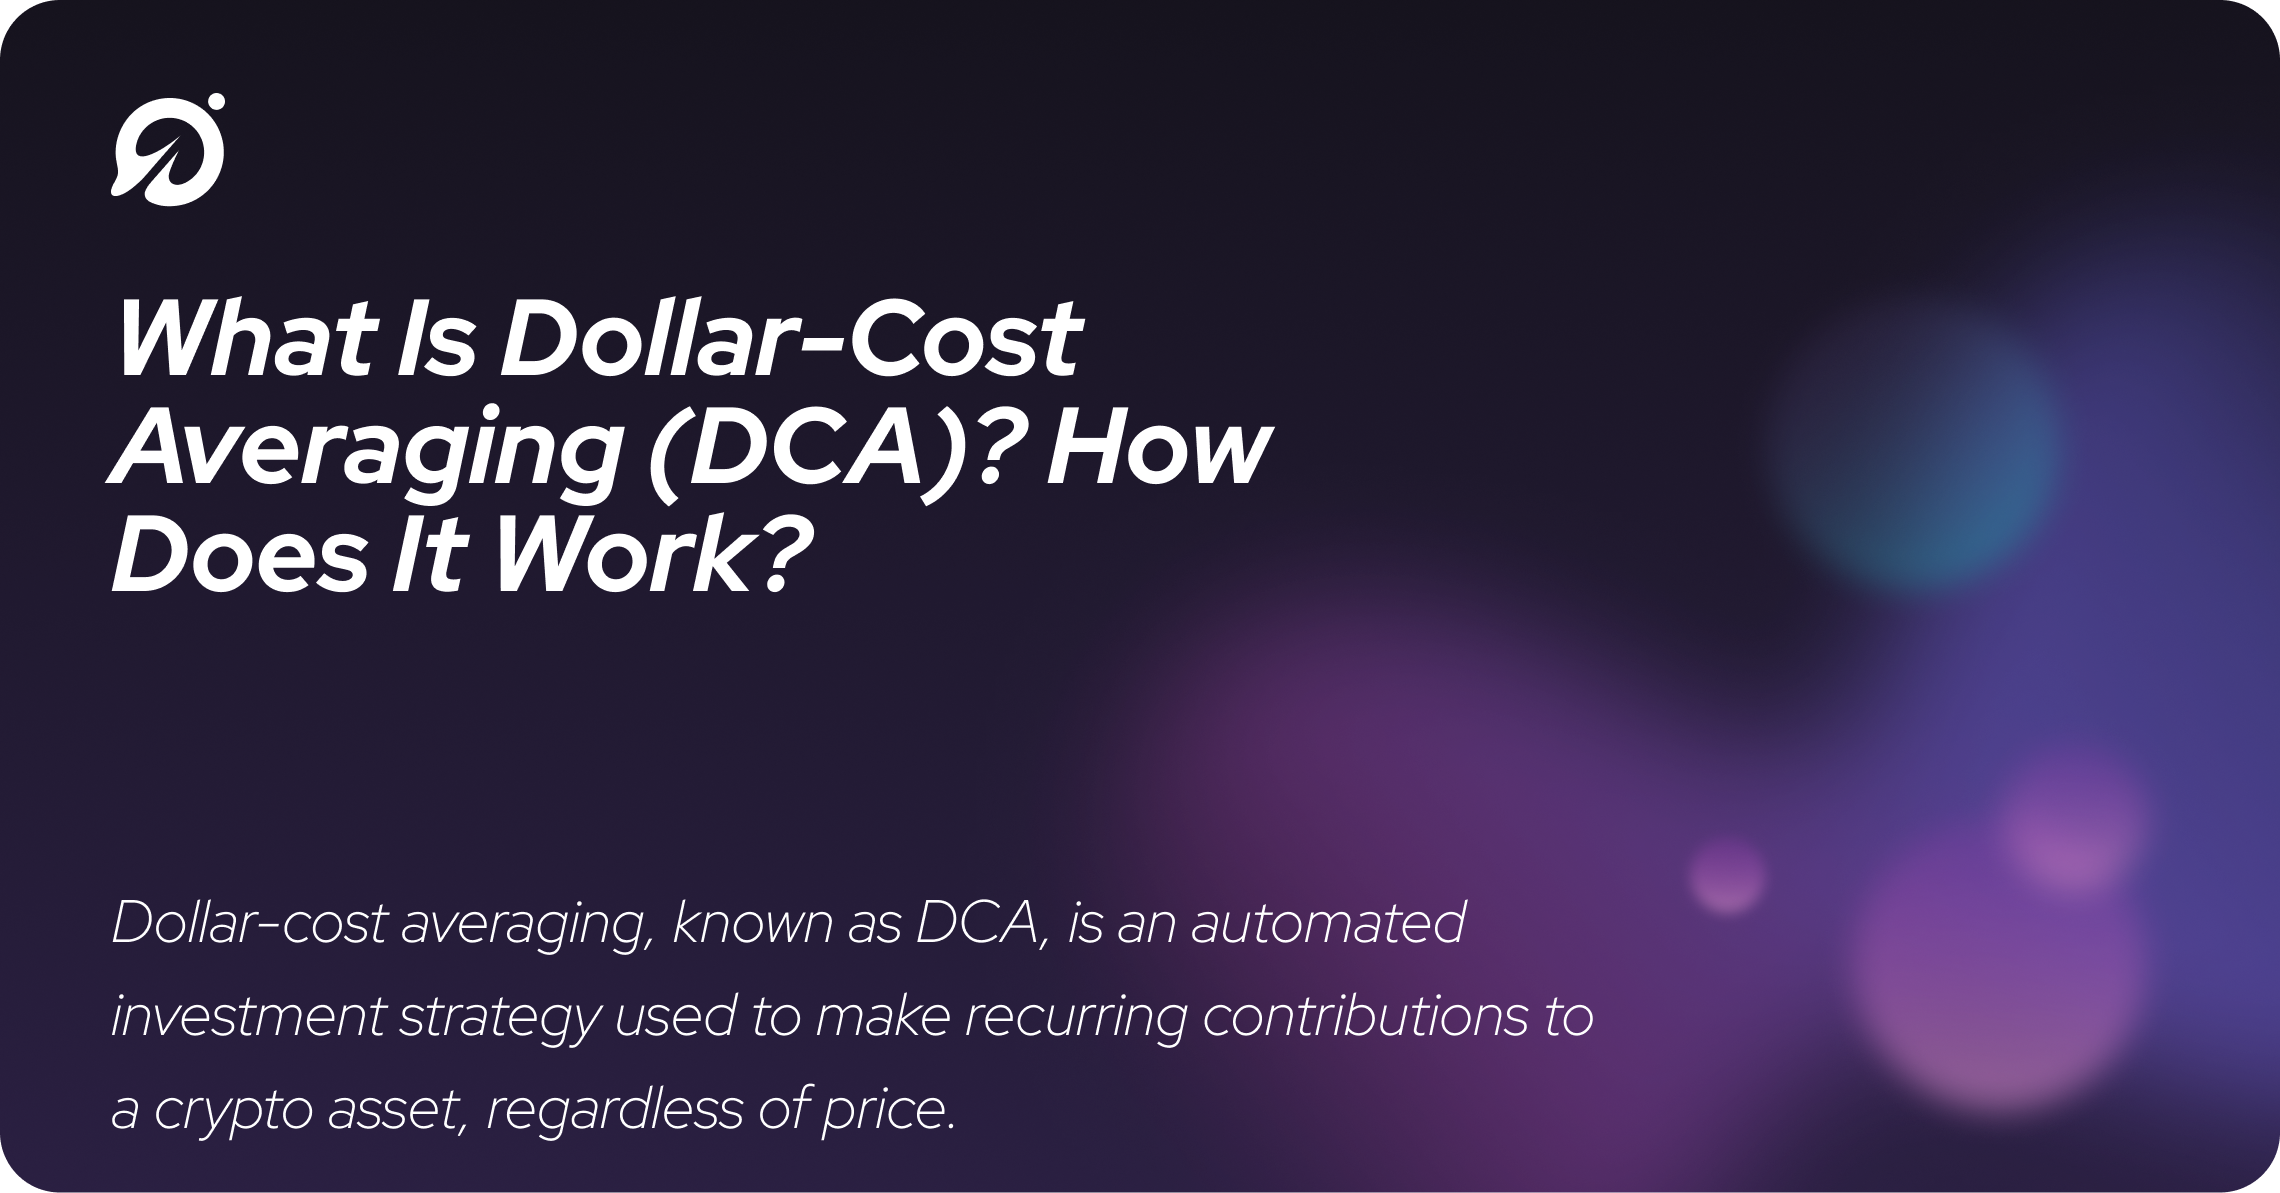 What Is Dollar-Cost Averaging (DCA)? How Does It Work?